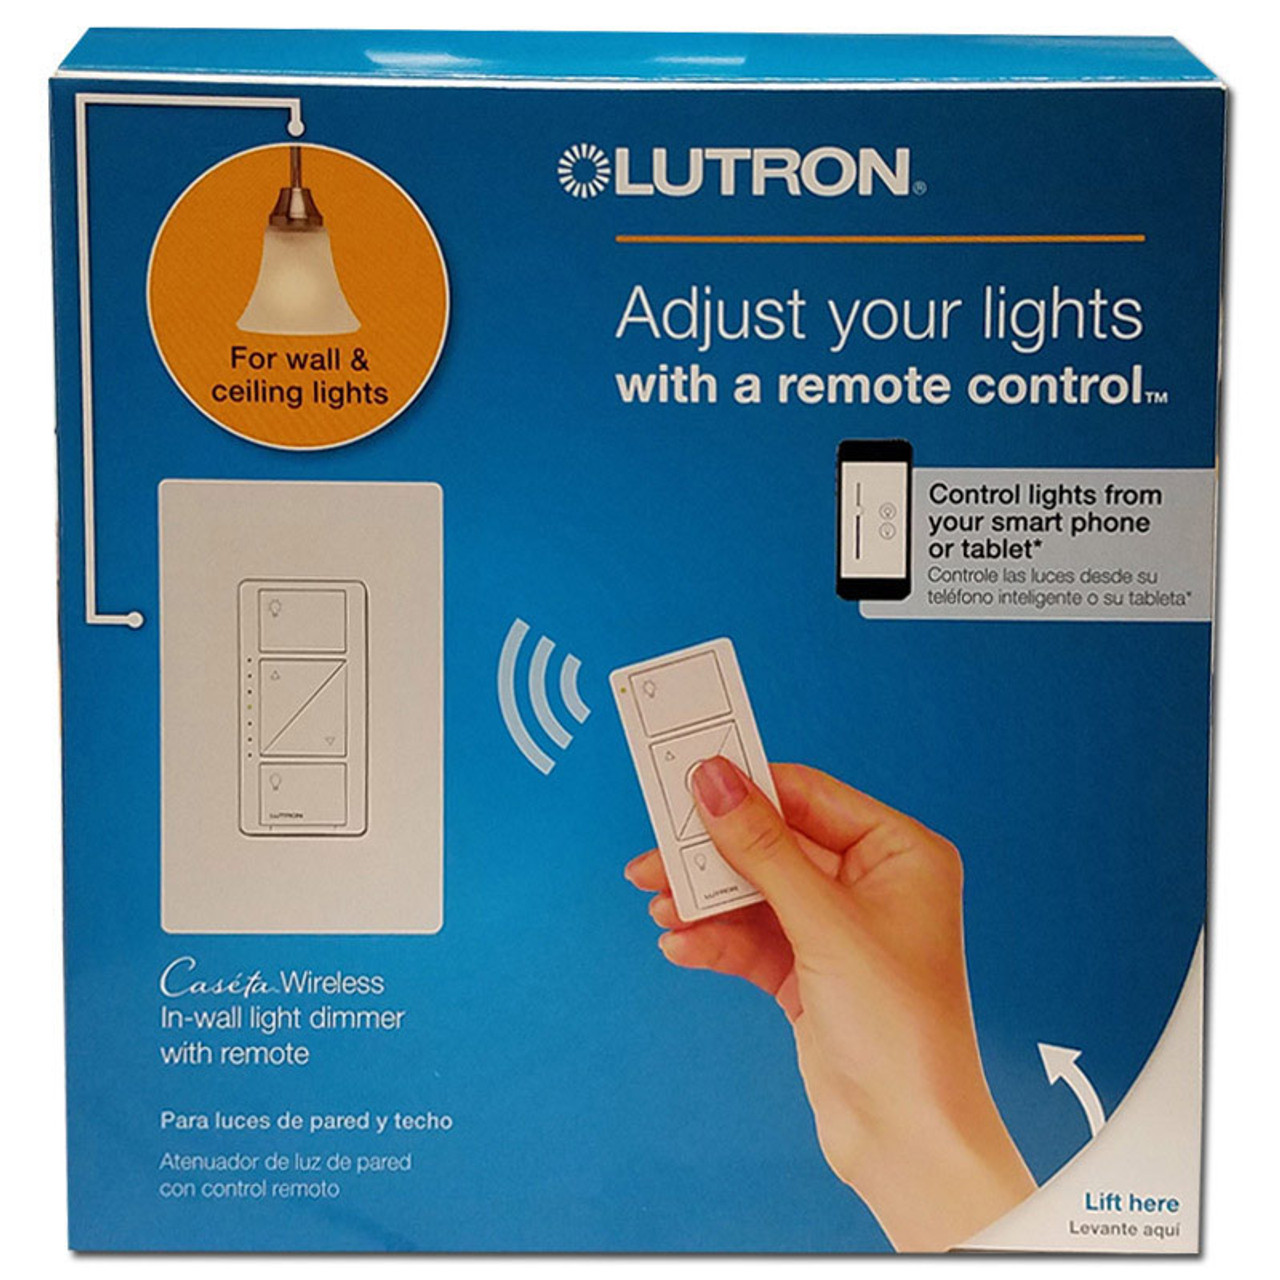 https://cdn11.bigcommerce.com/s-wlejmk/images/stencil/1280x1280/products/5477/21920/lutron-wireless-light-switch-and-remote-included-lut-p-pkg1w-wh--wall__20341.1532112846.jpg?c=2